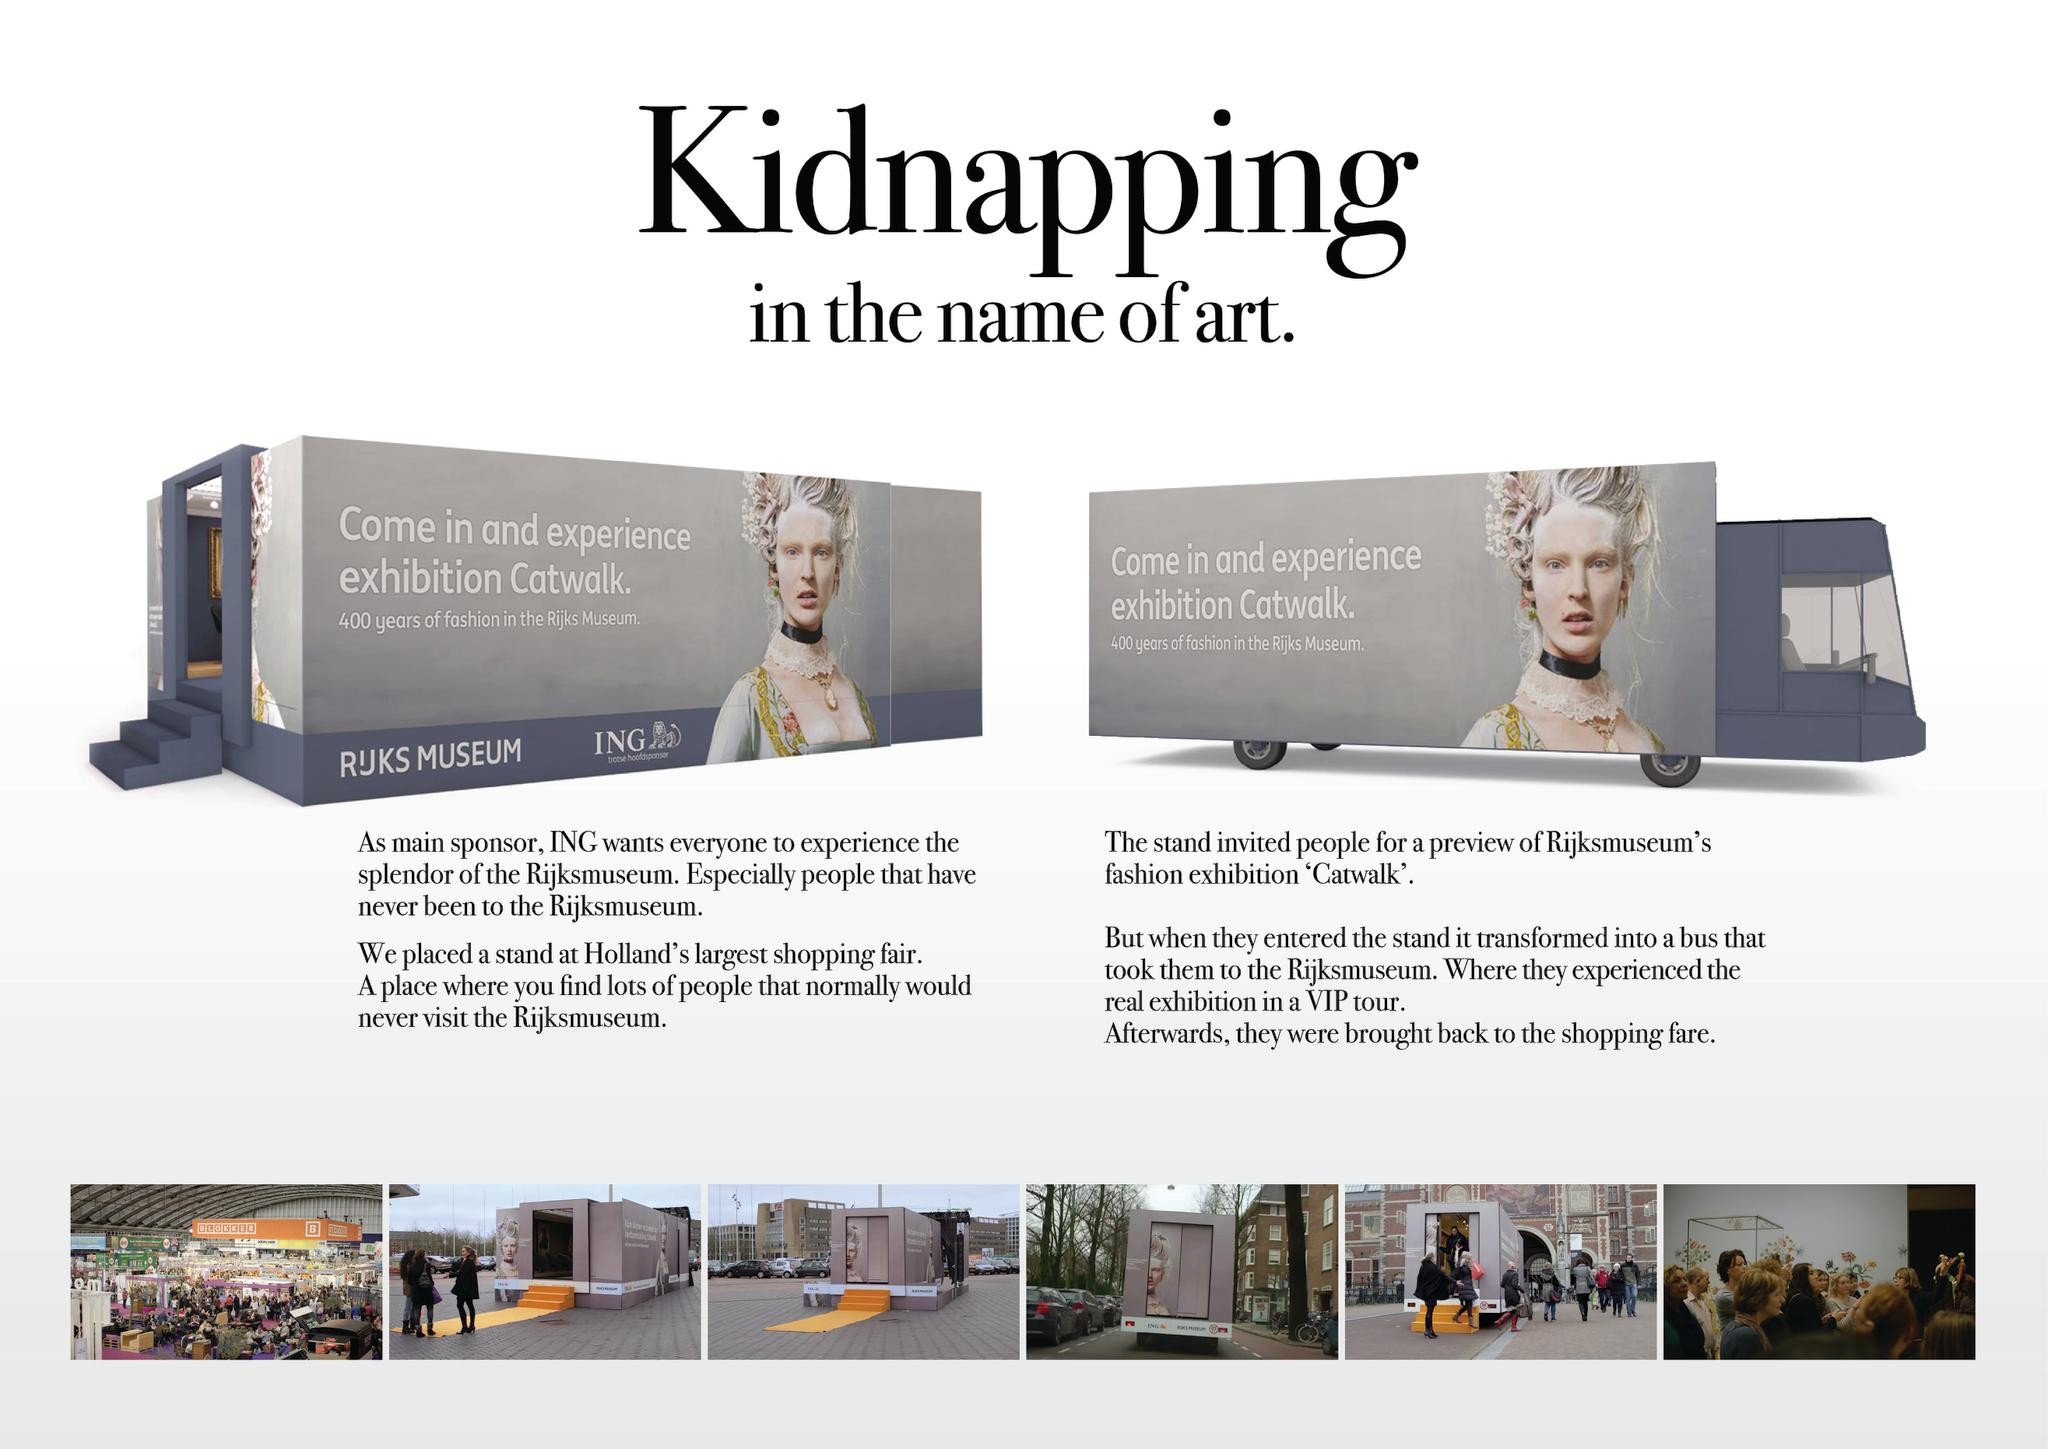 Kidnapping in the name of Art